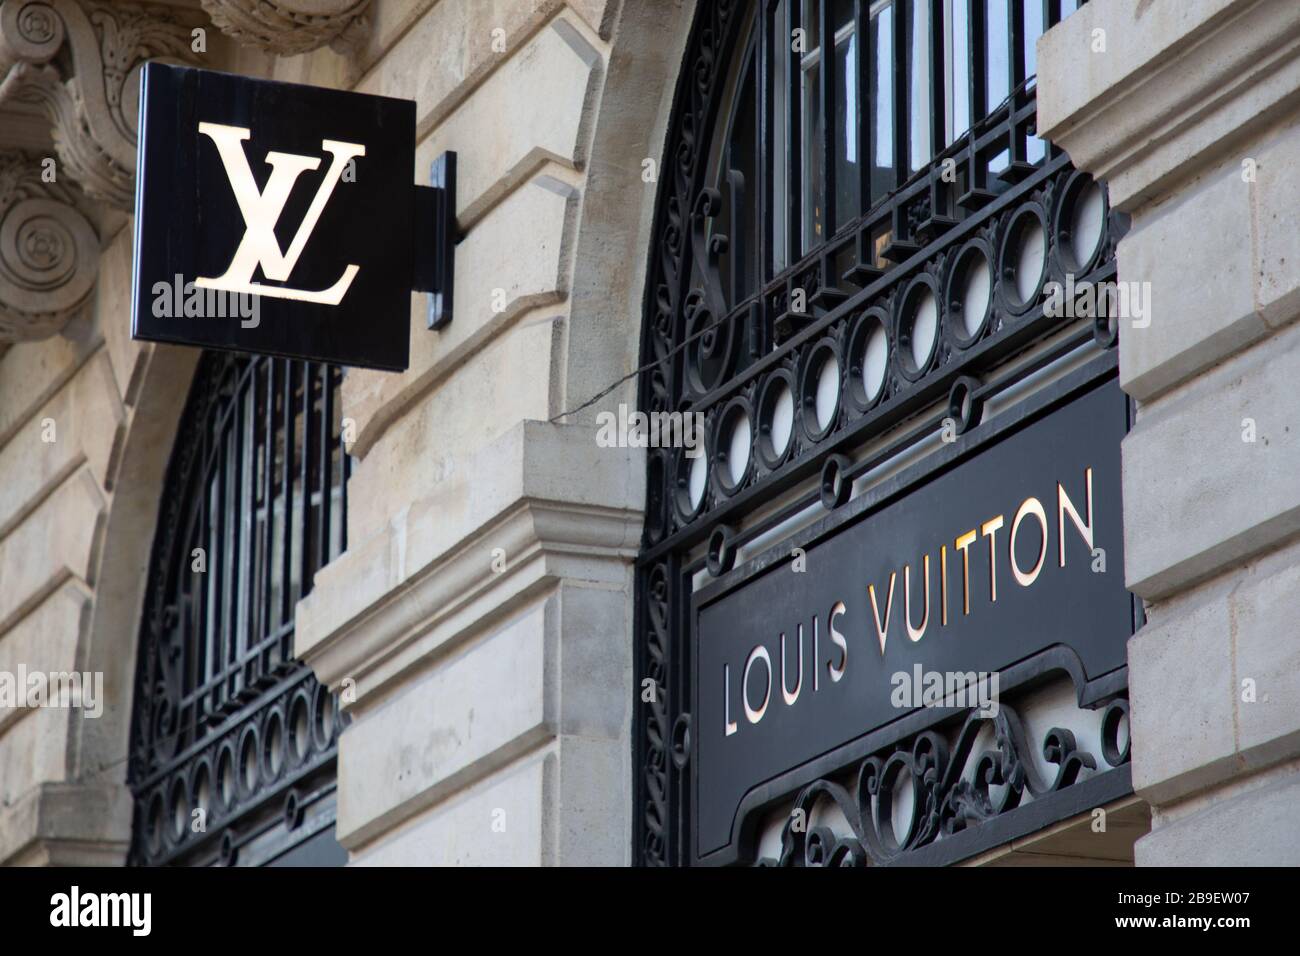 louis vuitton design logo - Saferbrowser Image Search Results in